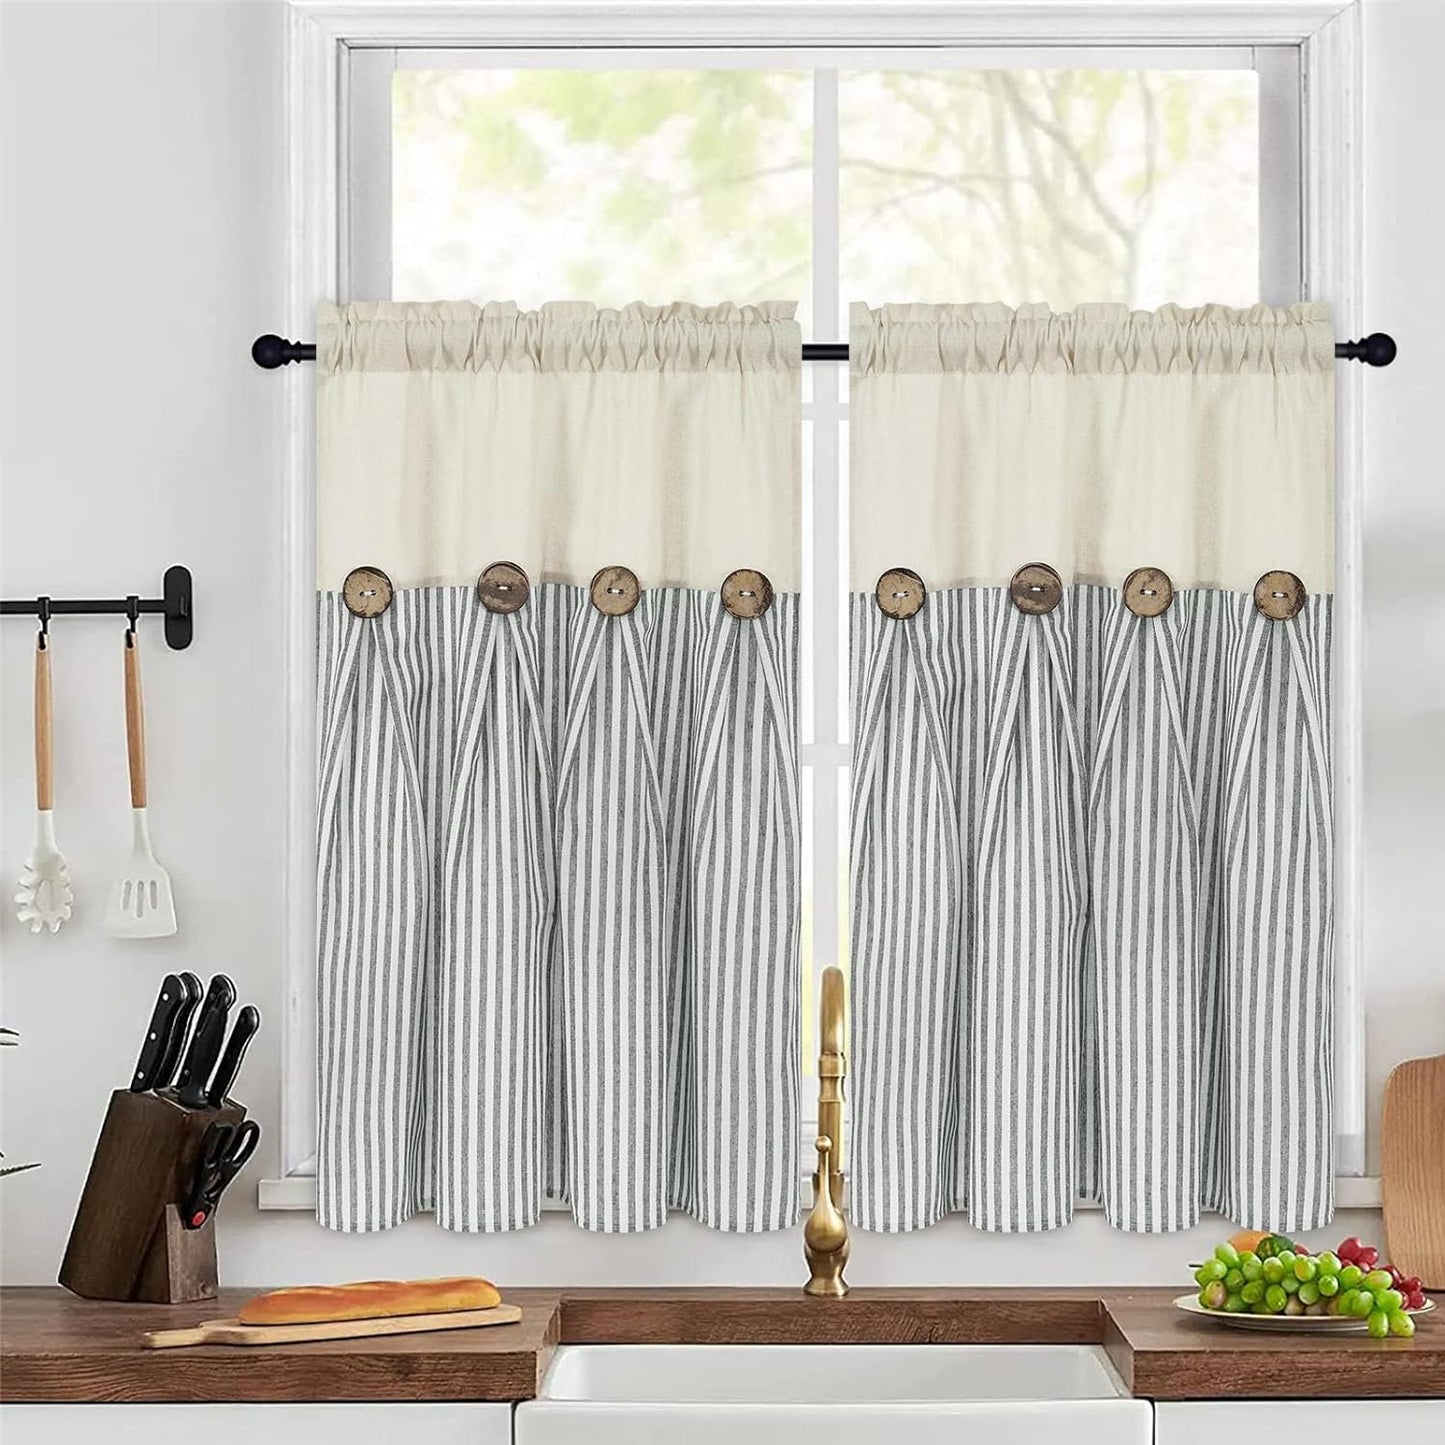 Cotton Linen Farmhouse Curtains Boho Rustic Button Curtains Natural and Dark Grey Stripe Color Block Curtain Rod Pocket & Back Tab Window Drapes for Bedroom Living Room(52 X 84 Inch, 2 Panels)  BLEUM CADE Sage Gree Stripe W26 X L36 